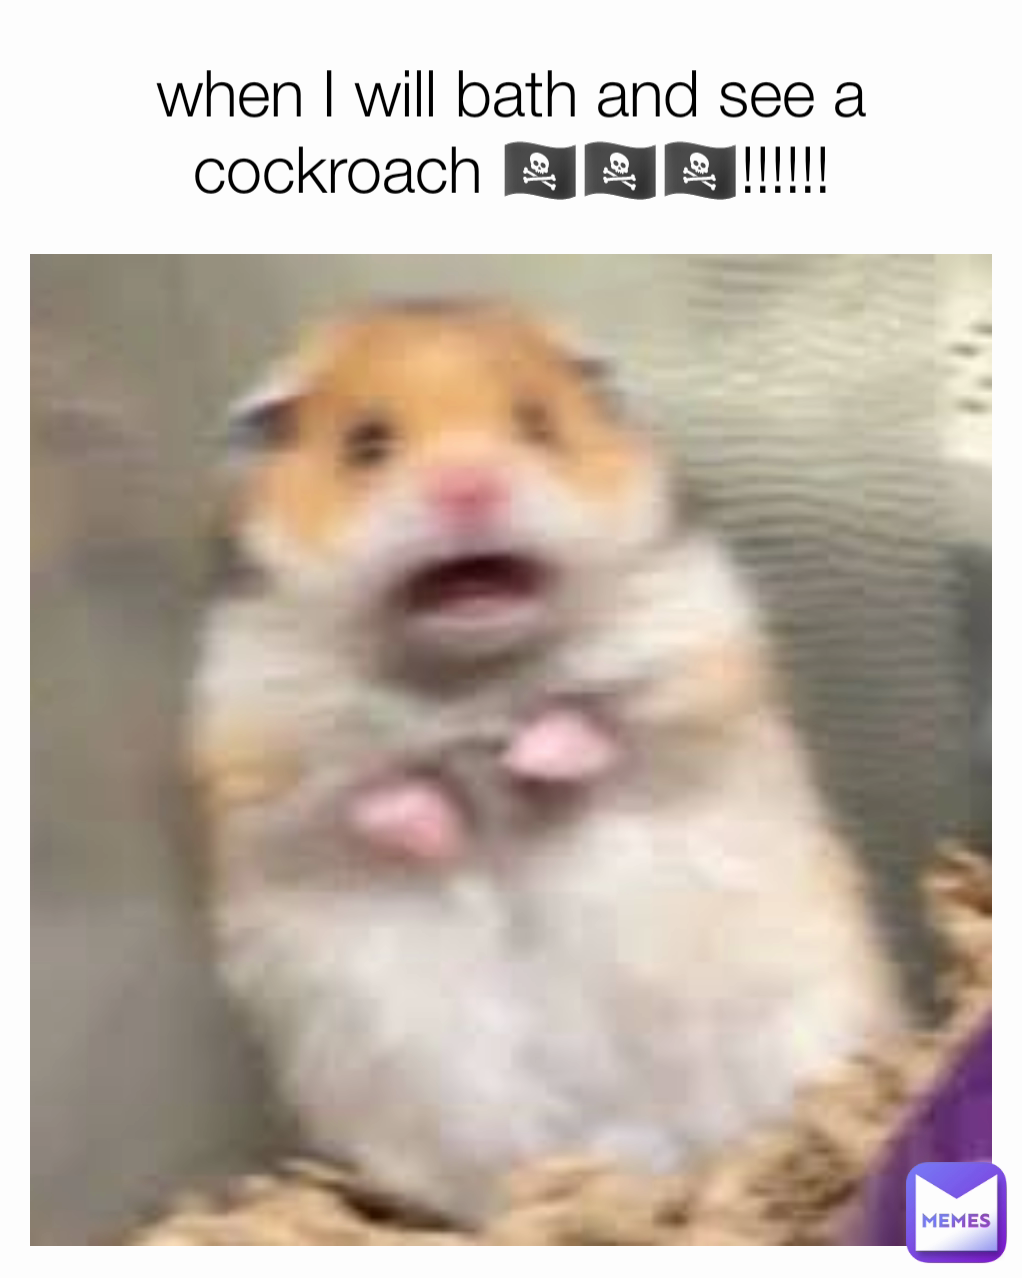 when I will bath and see a cockroach 🏴‍☠️🏴‍☠️🏴‍☠️!!!!!!